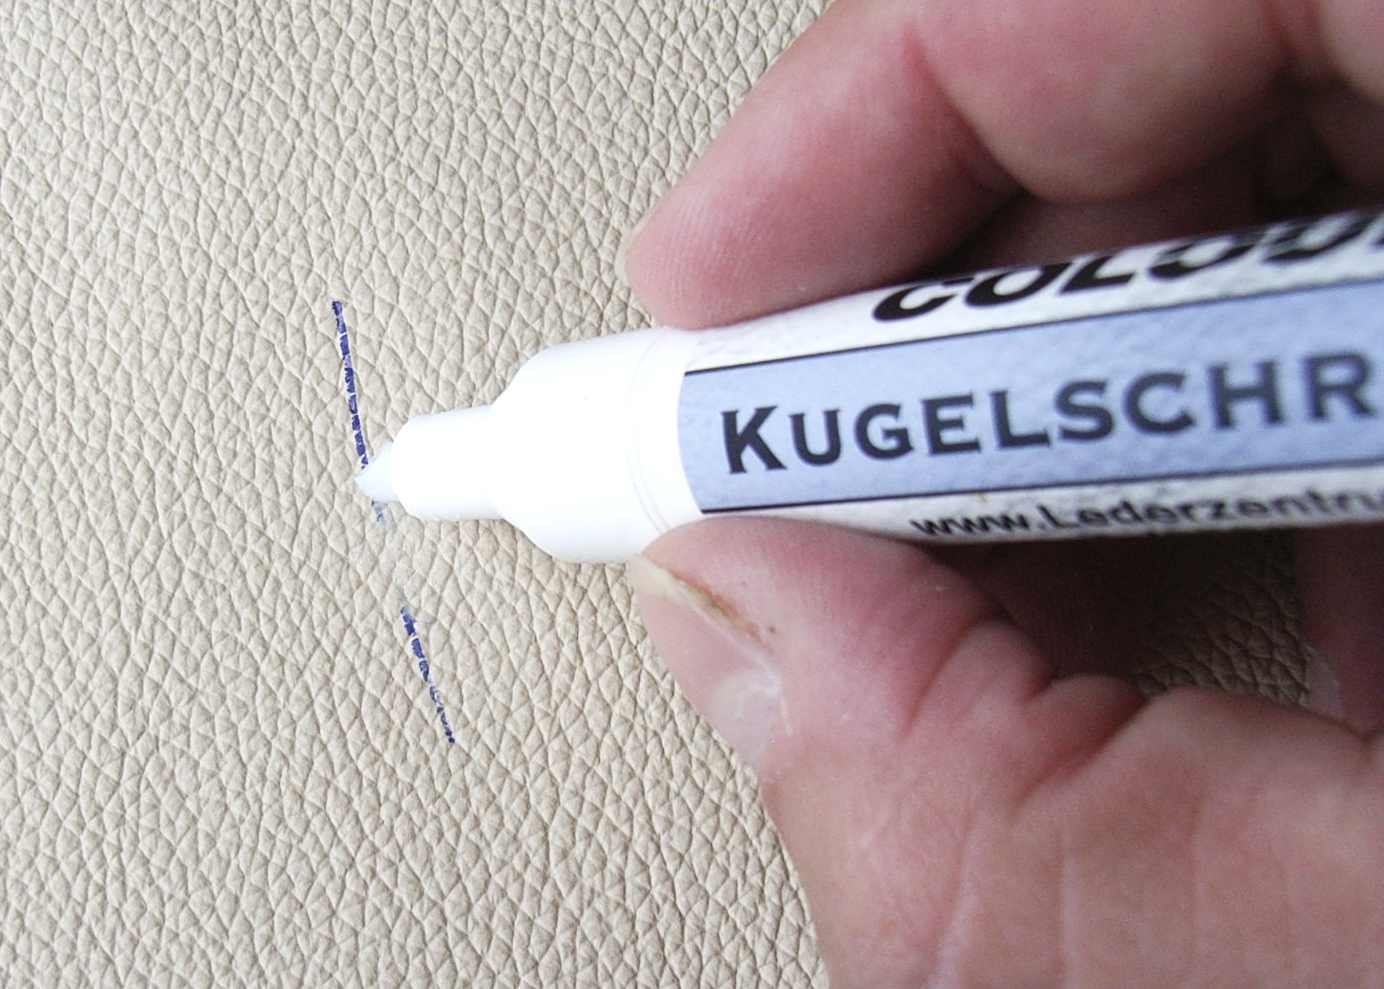 Biro Ballpoint Pen Marks From Leather, How To Erase Pen From Sofa